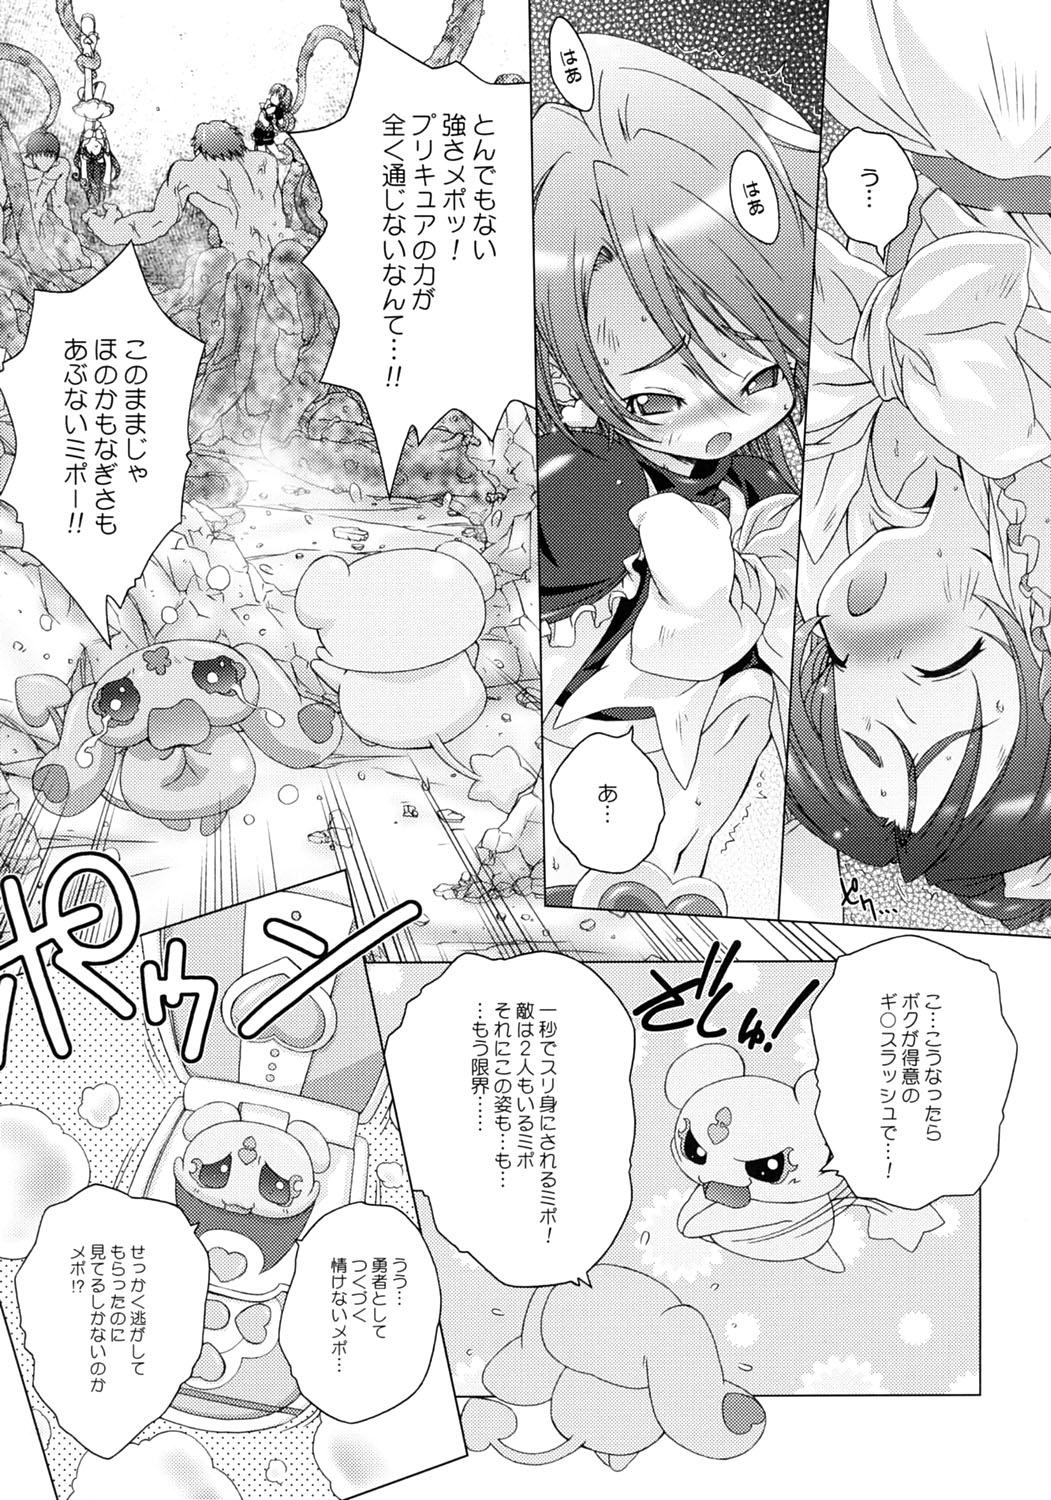 Perverted BlanBrulee - Pretty cure Outdoor - Page 6